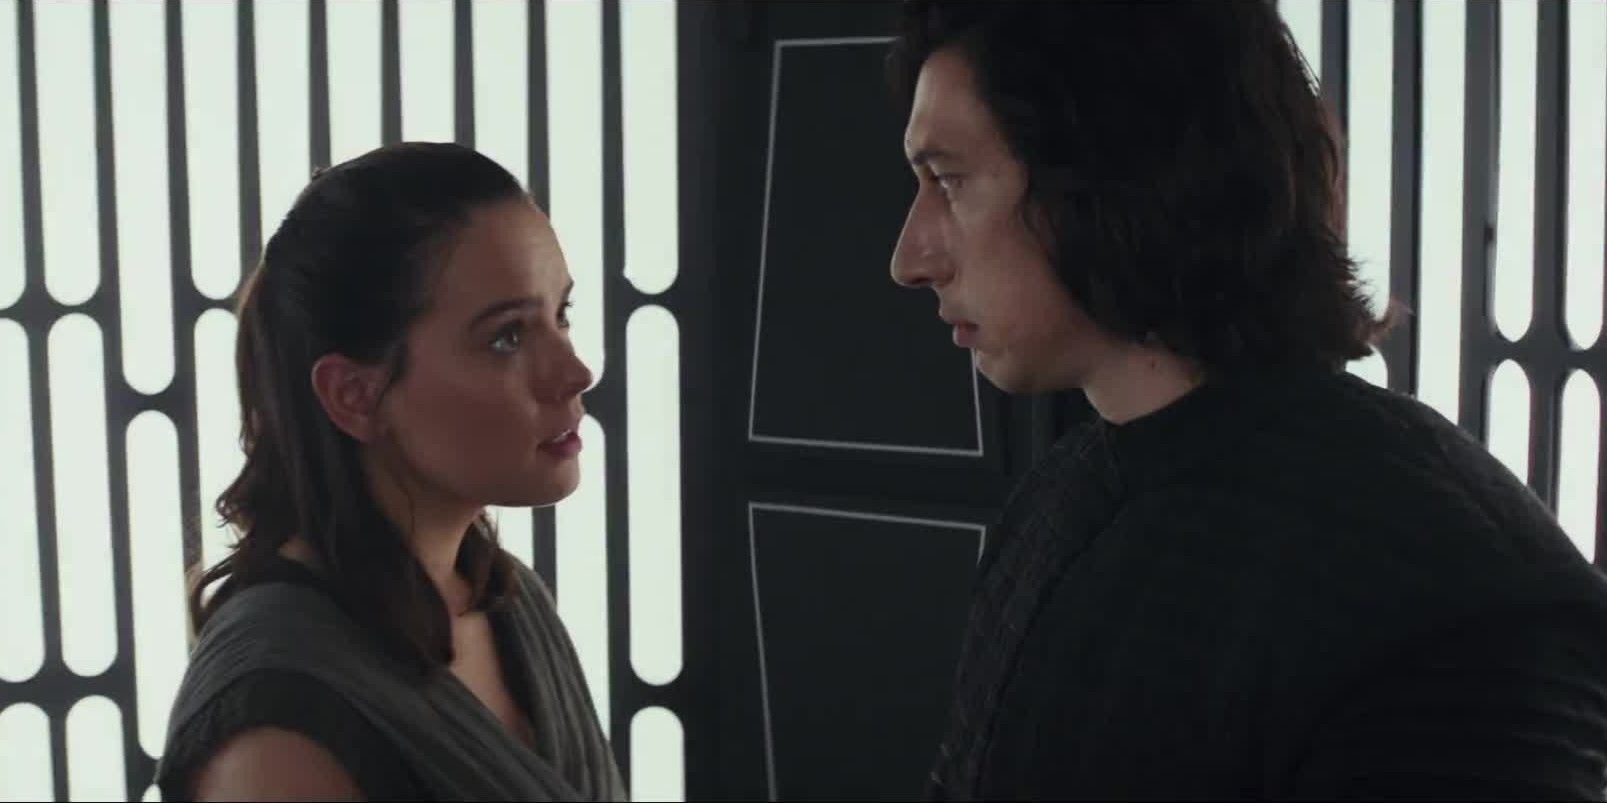 Rey and Kylo talk in an elevator in The Last Jedi